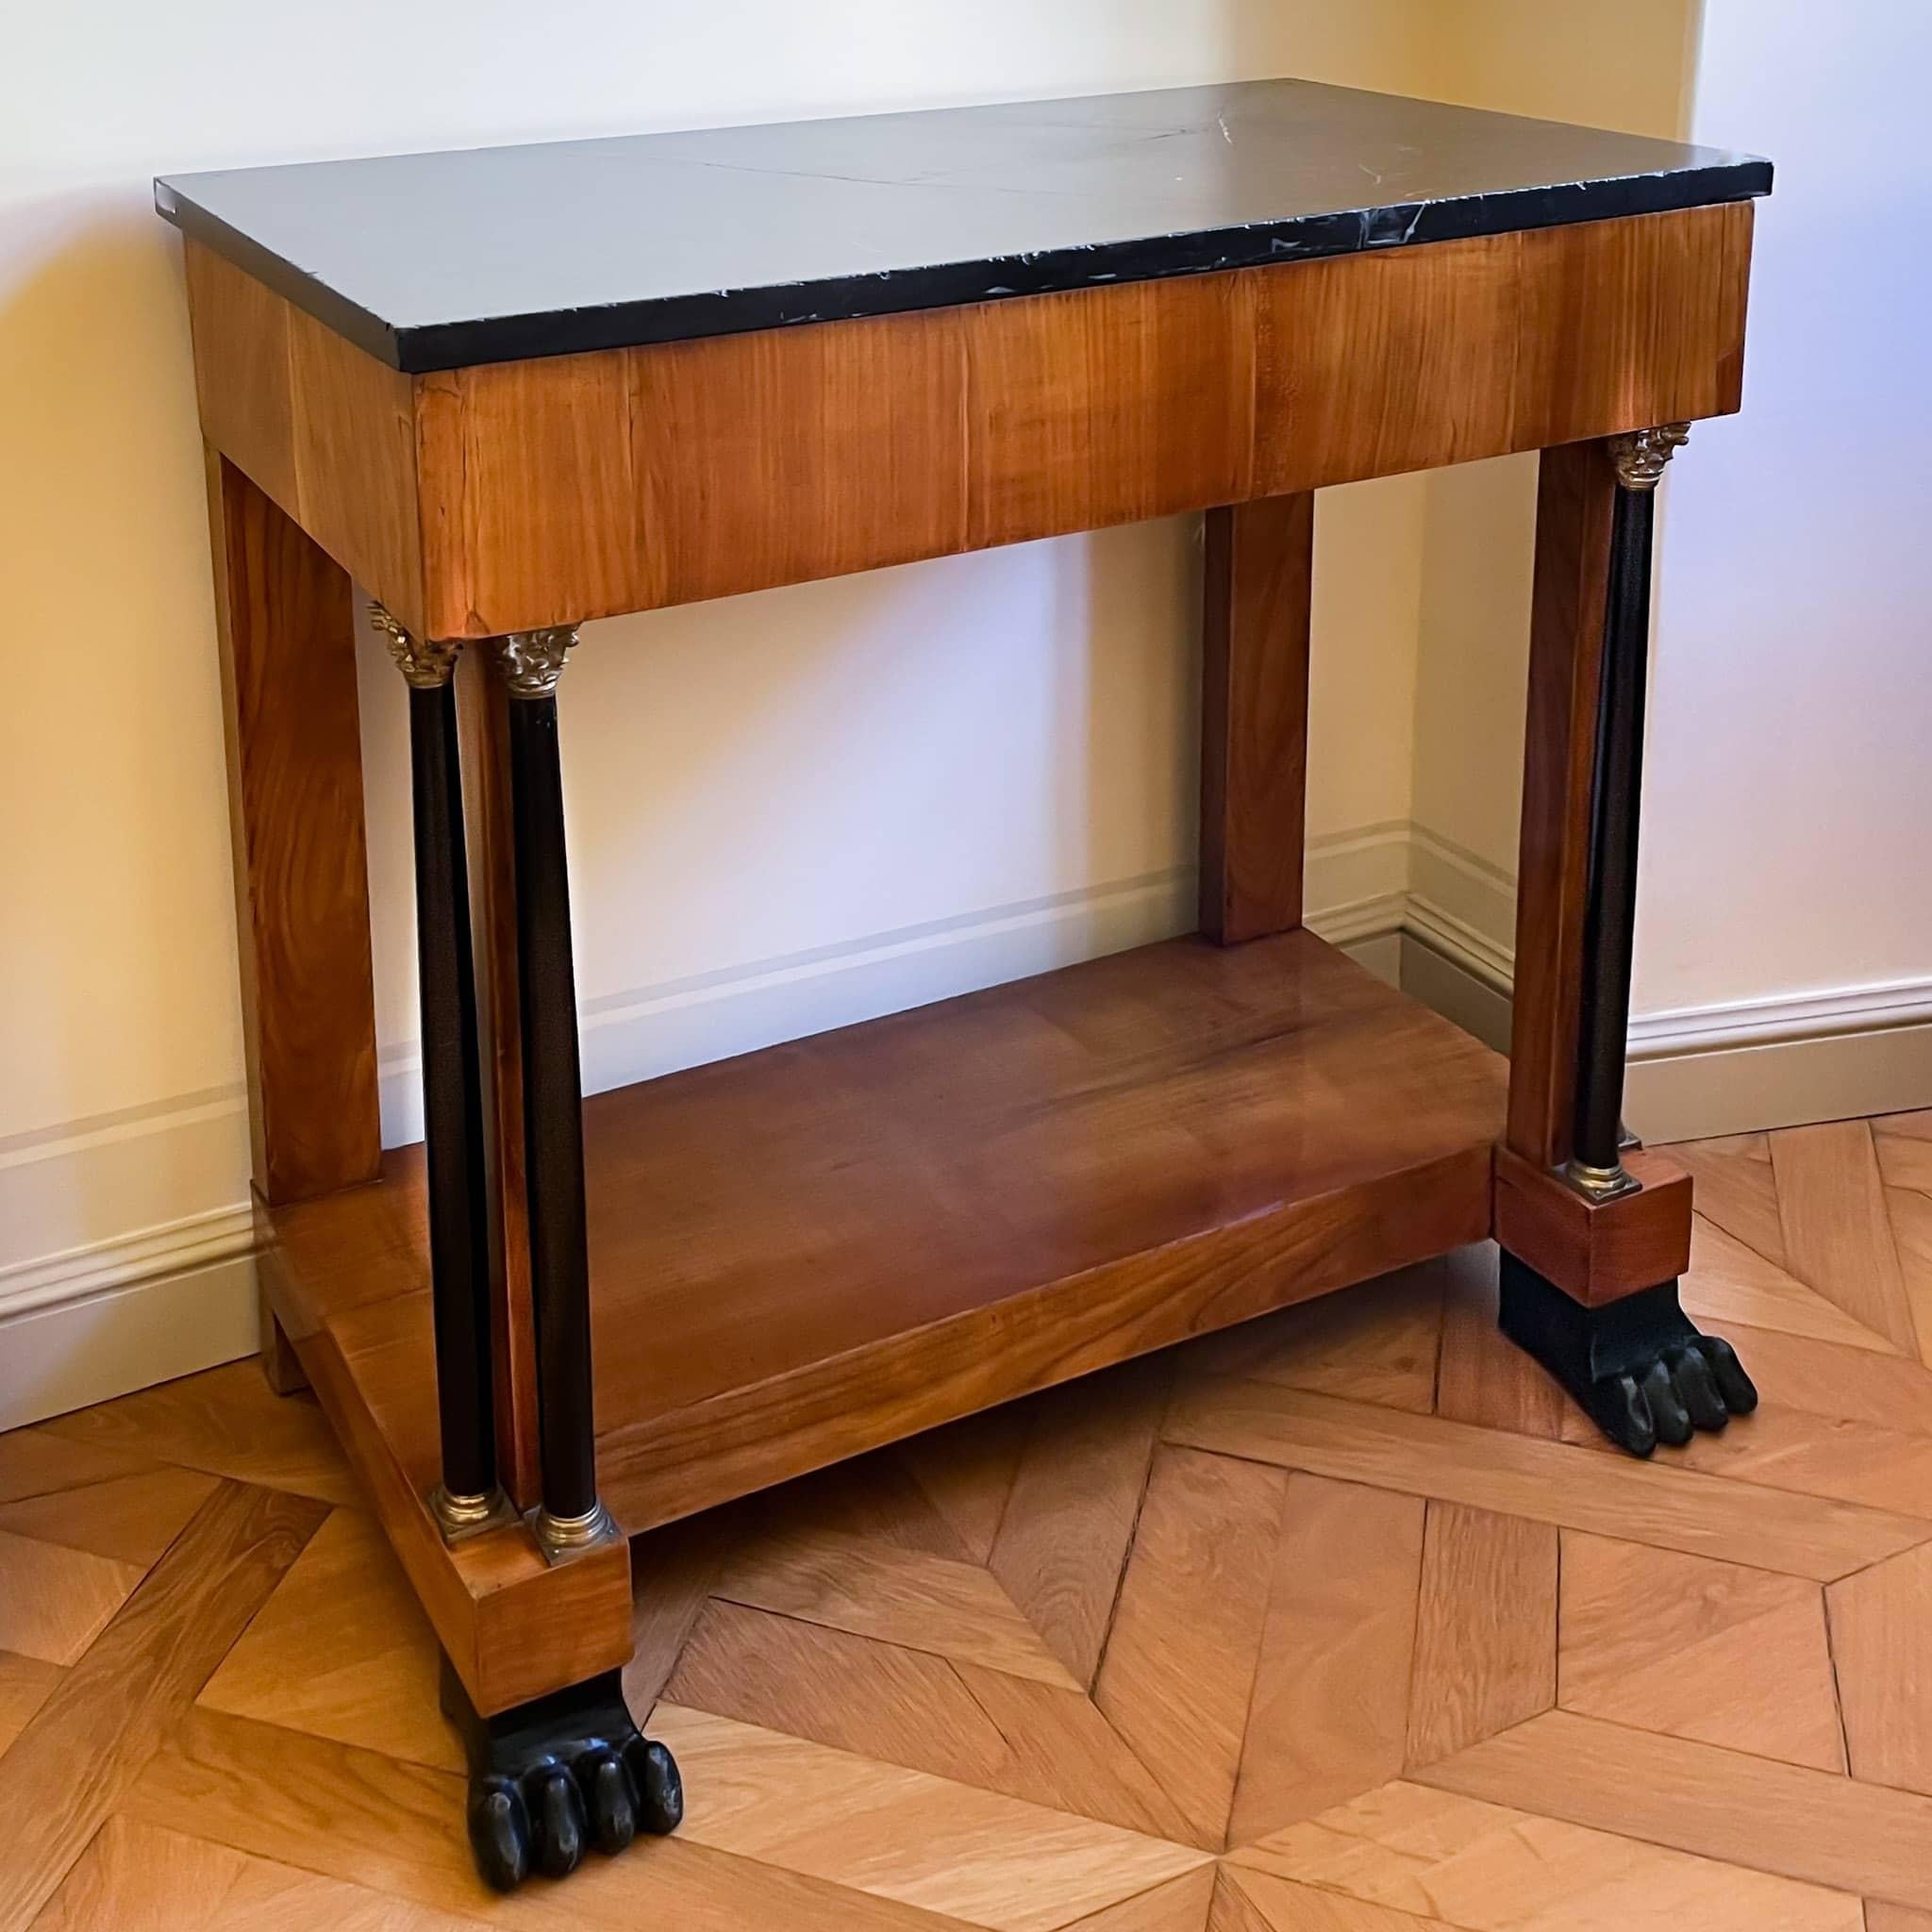 Biedermeier Cherry Console with Marble Top, West Germany / Rhineland, circa 1820 For Sale 9